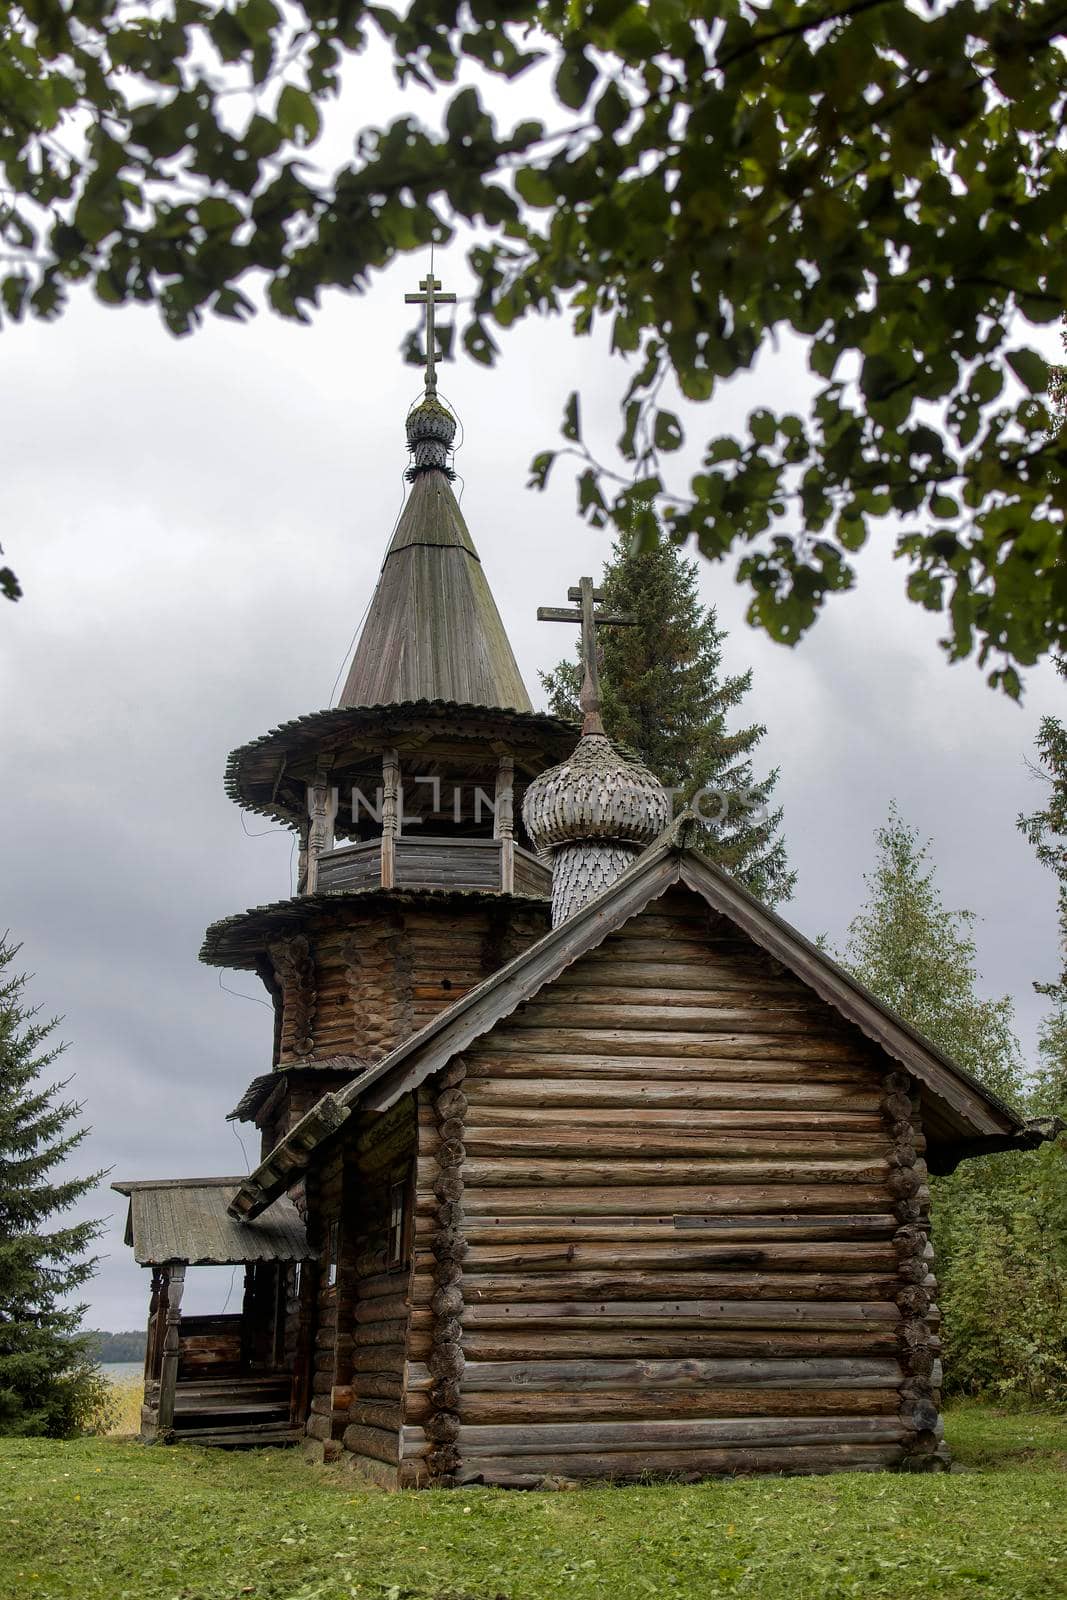 Korba village, Medvezhyegorsky district, Kizhi, Karelia, Russia - September 2021, Chapel of the Sign of the Most Holy Theotokos